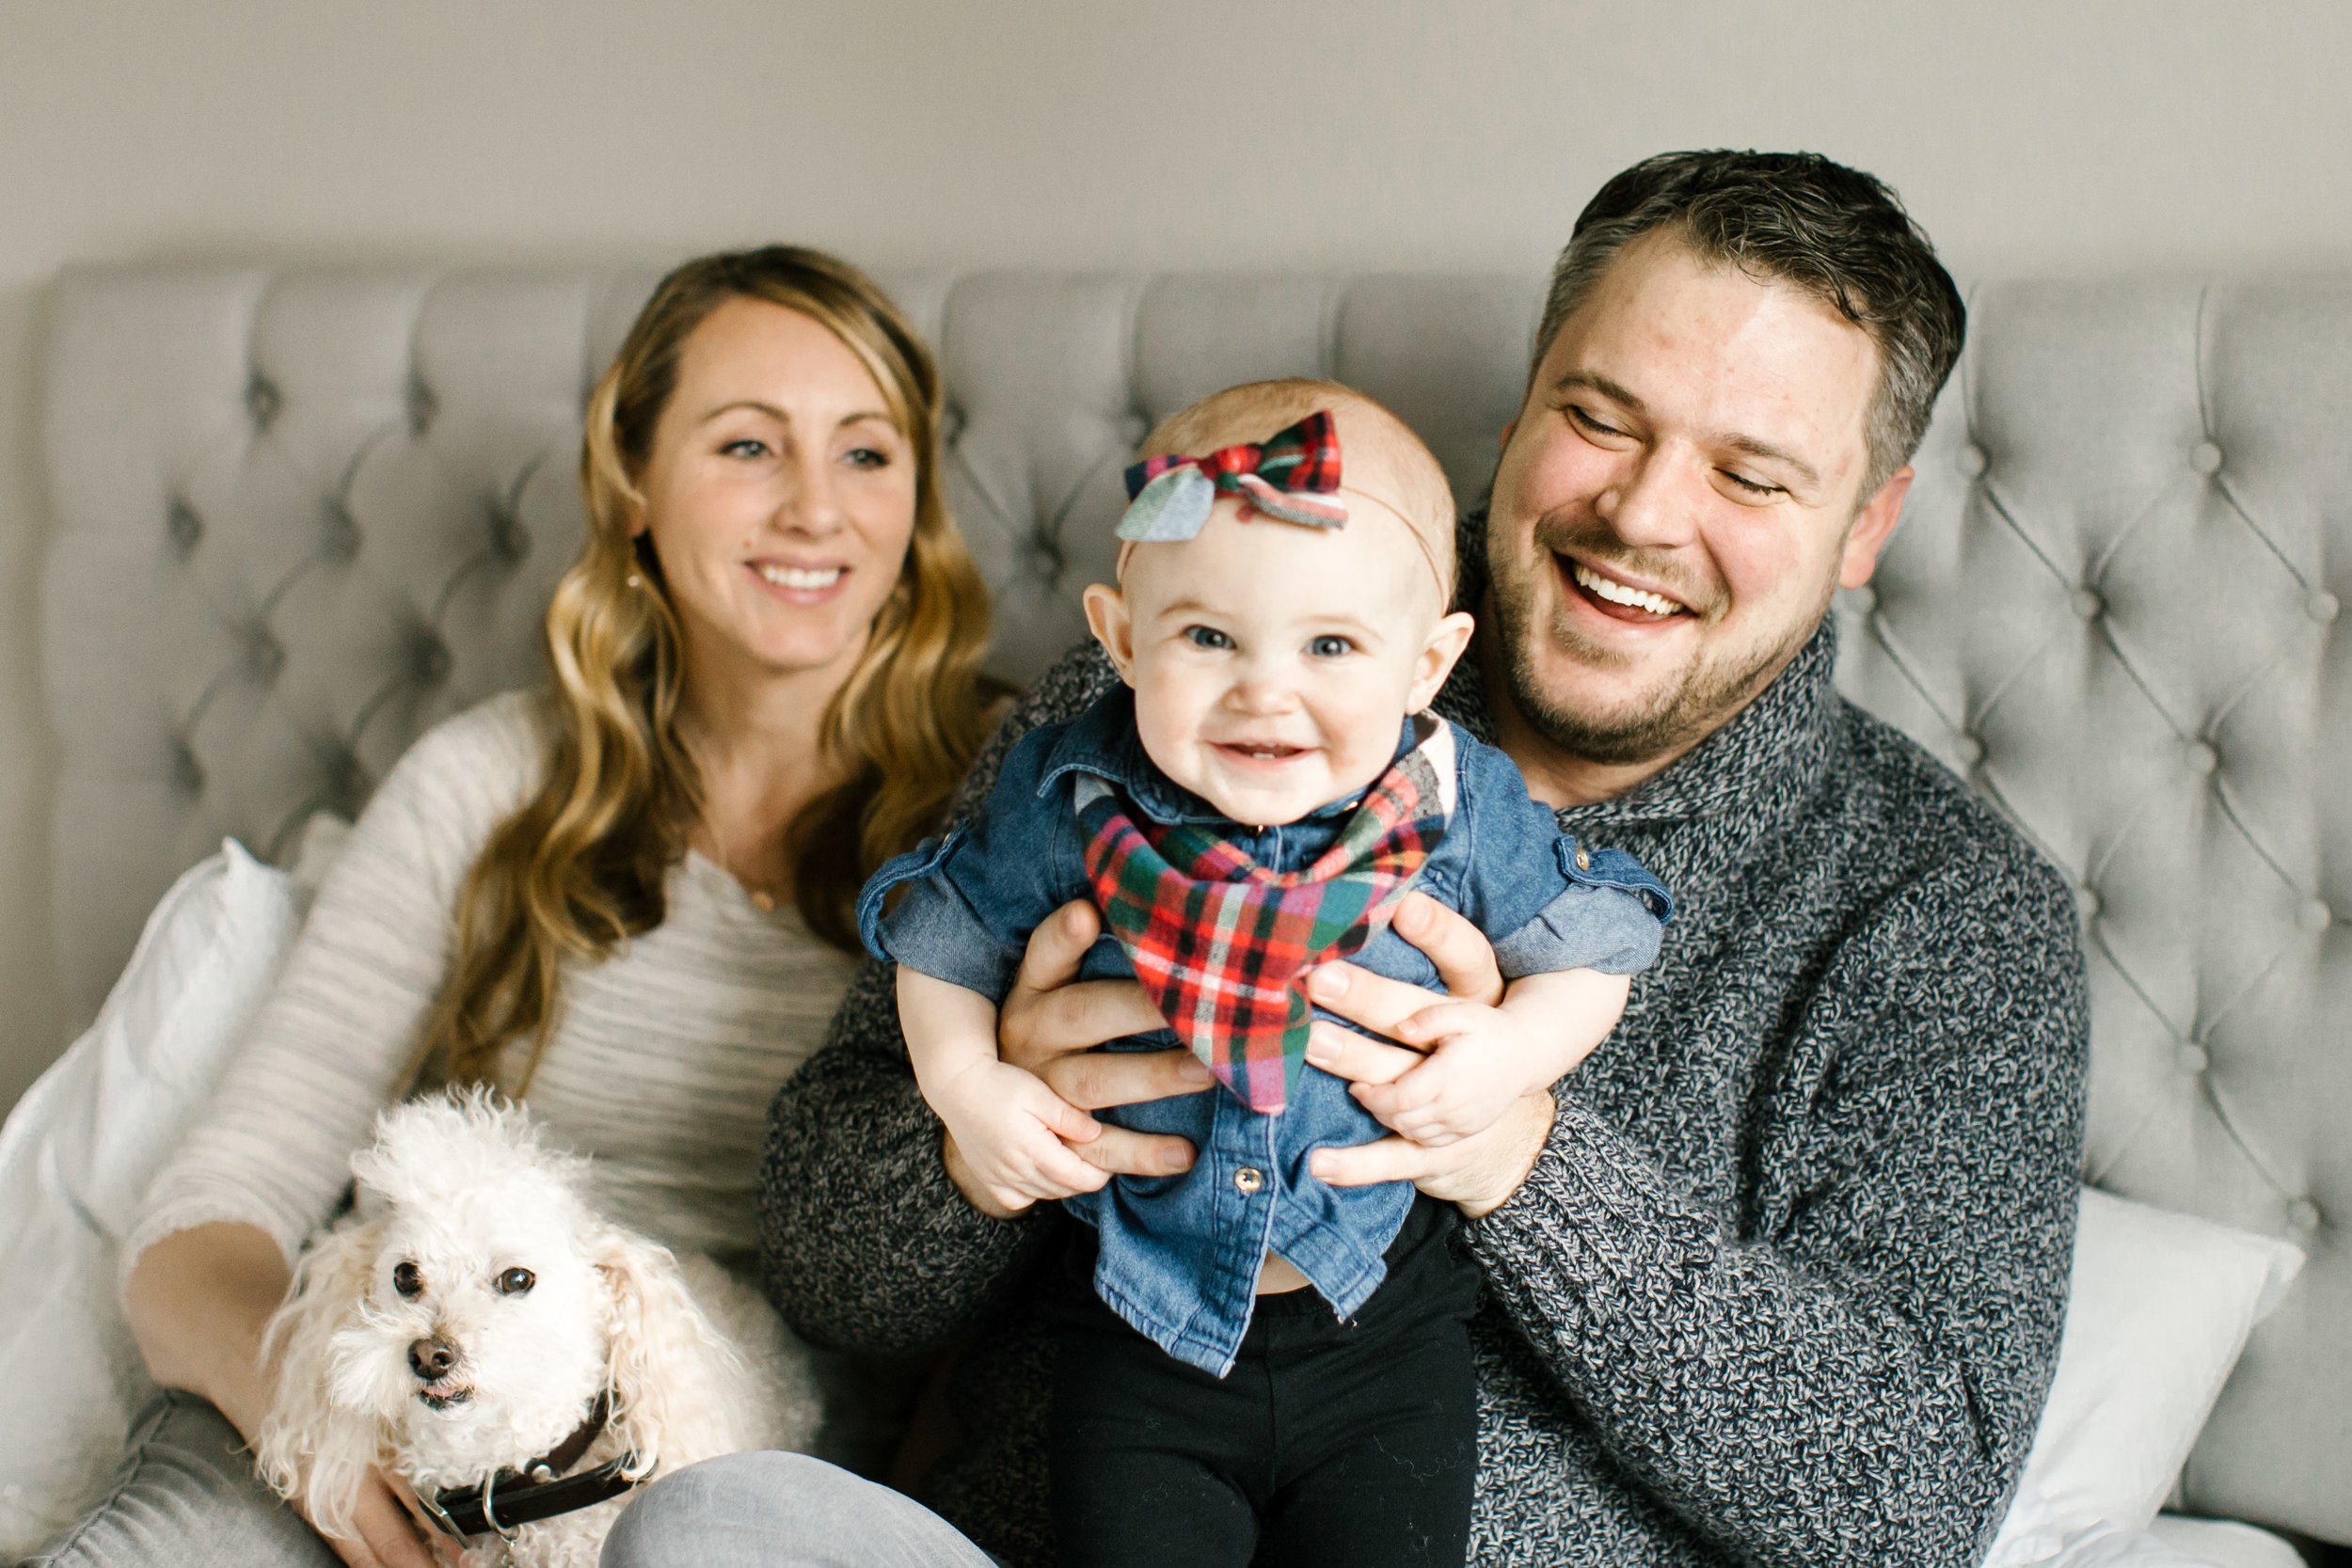 Natural light sweet family at home lifestlyle photography seattle bellevue kirkland WA Chelsea Macor Photography-3.jpg